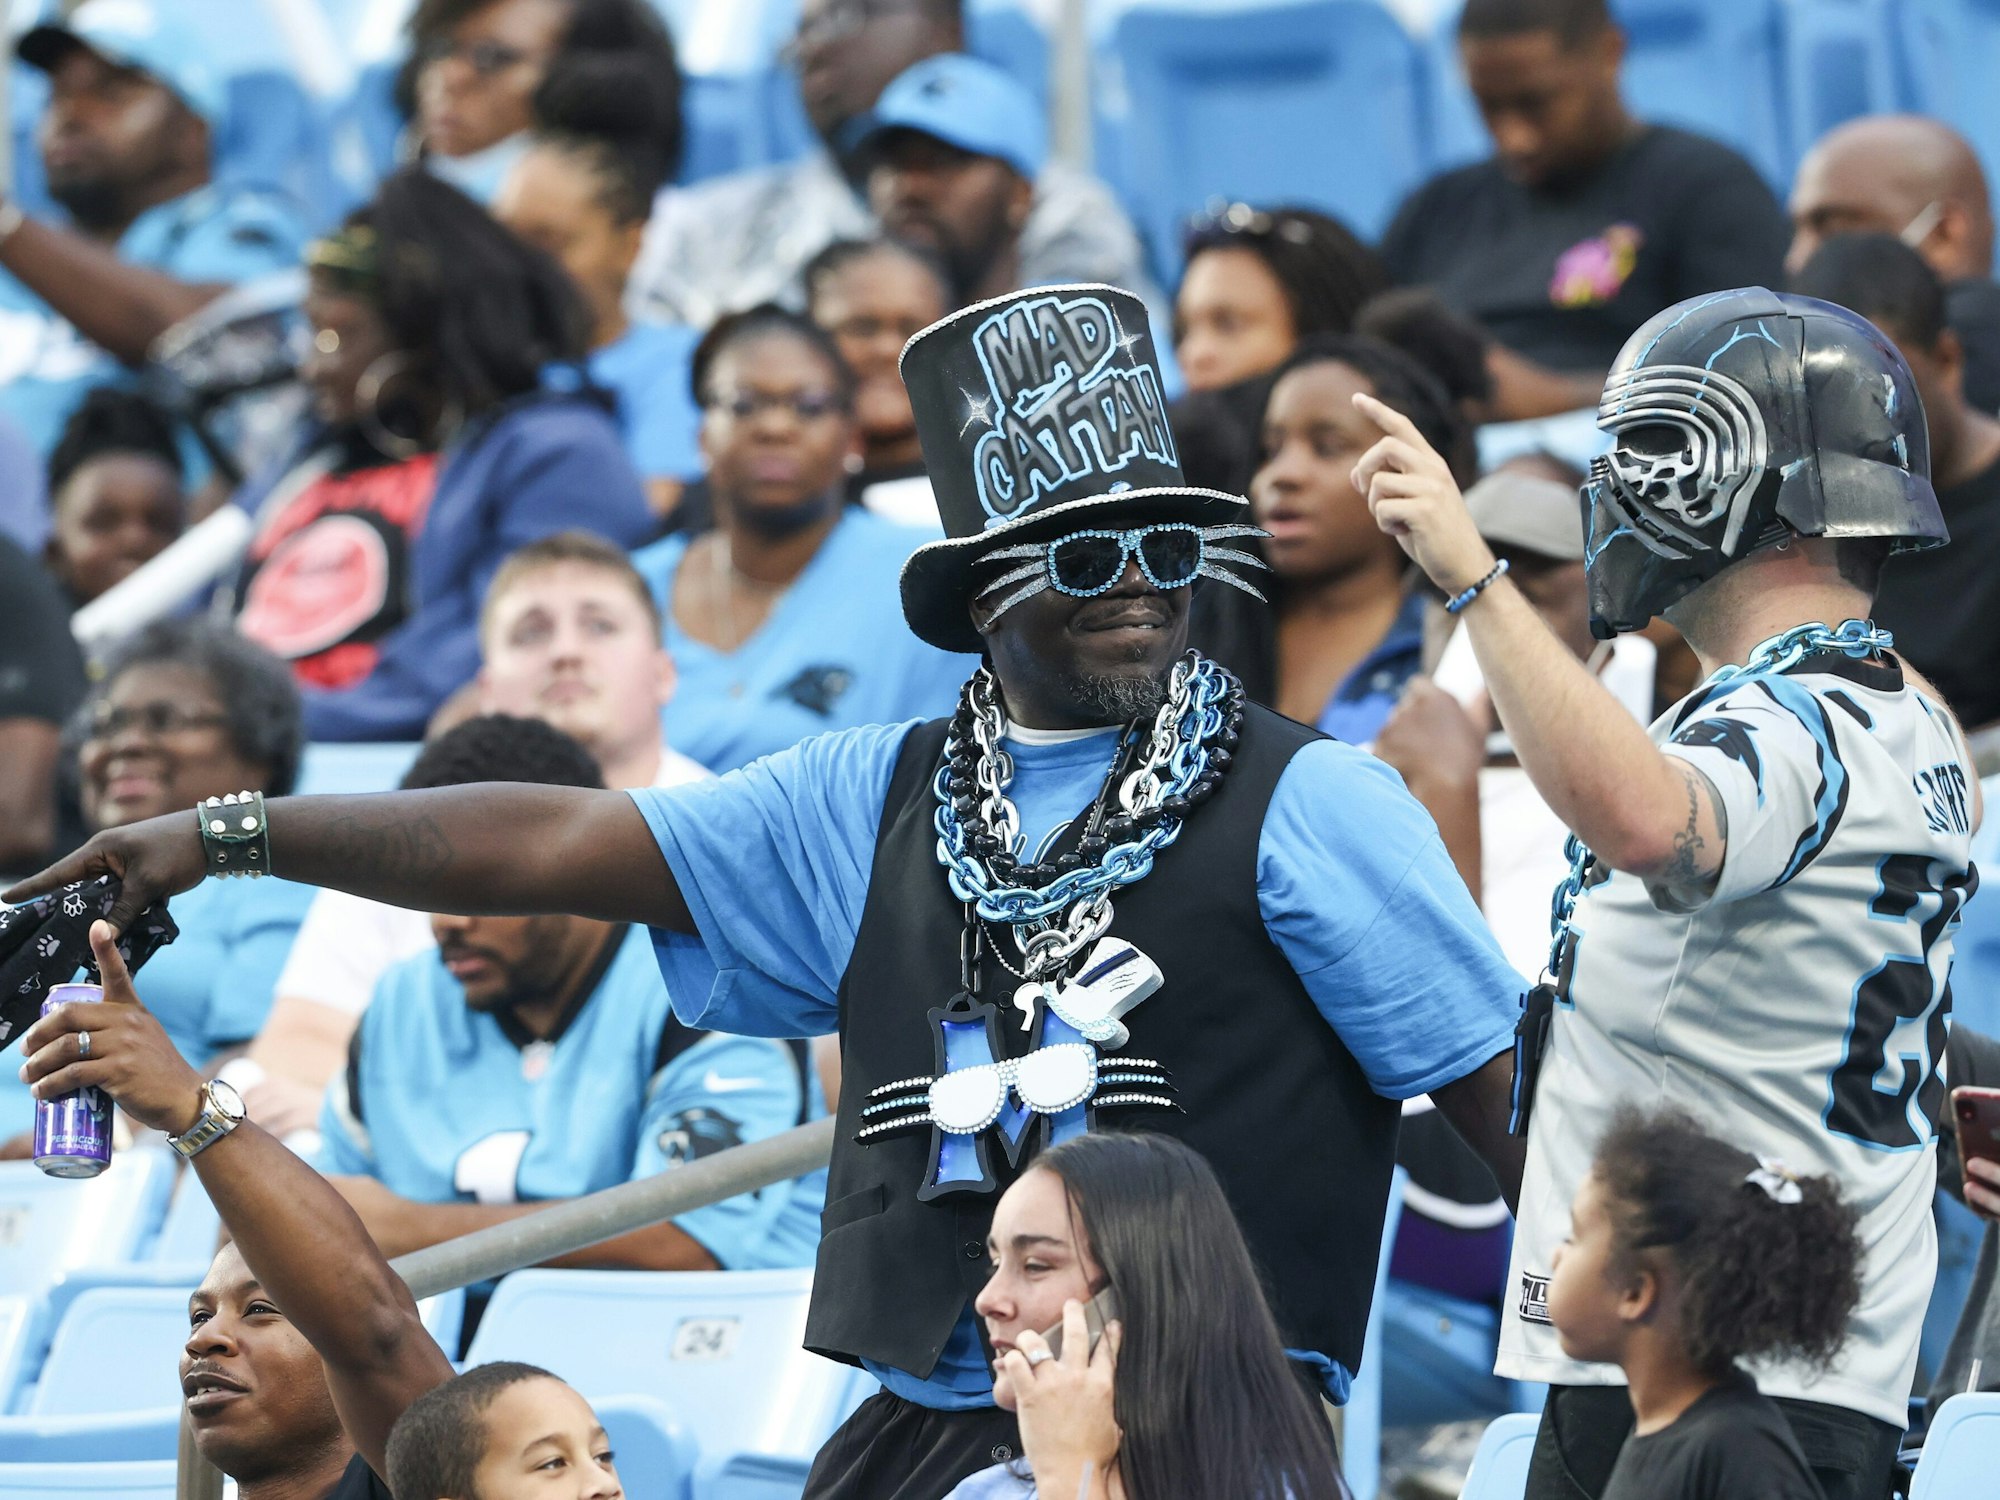 Carolina Panthers fans enjoy Fan Fest at the NFL football team's training camp in Charlotte, N.C., Friday, Aug. 6, 2021. (AP Photo/Nell Redmond)